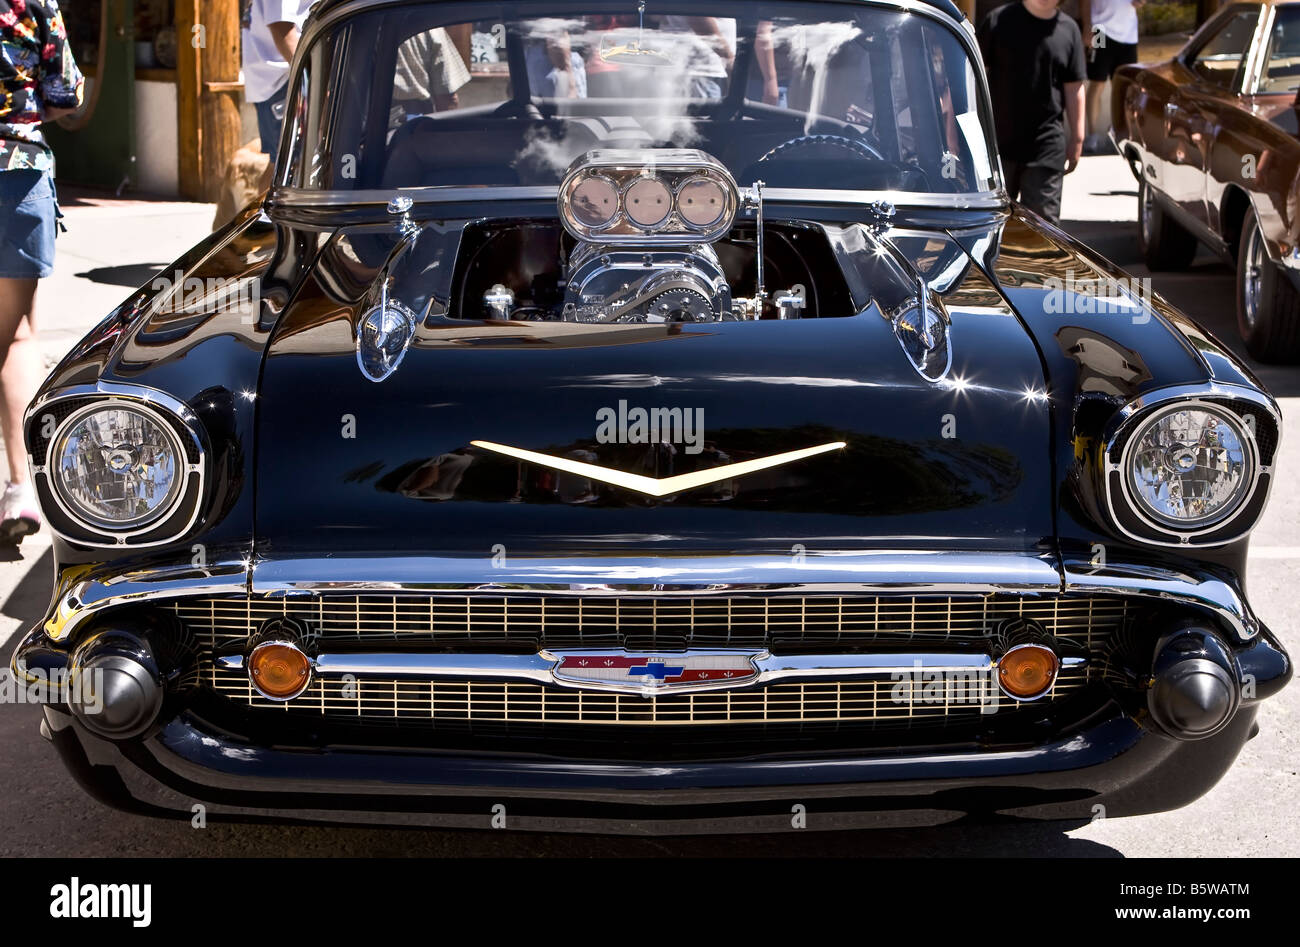 Black 1957 supercharged Chevrolet coupe Stock Photo